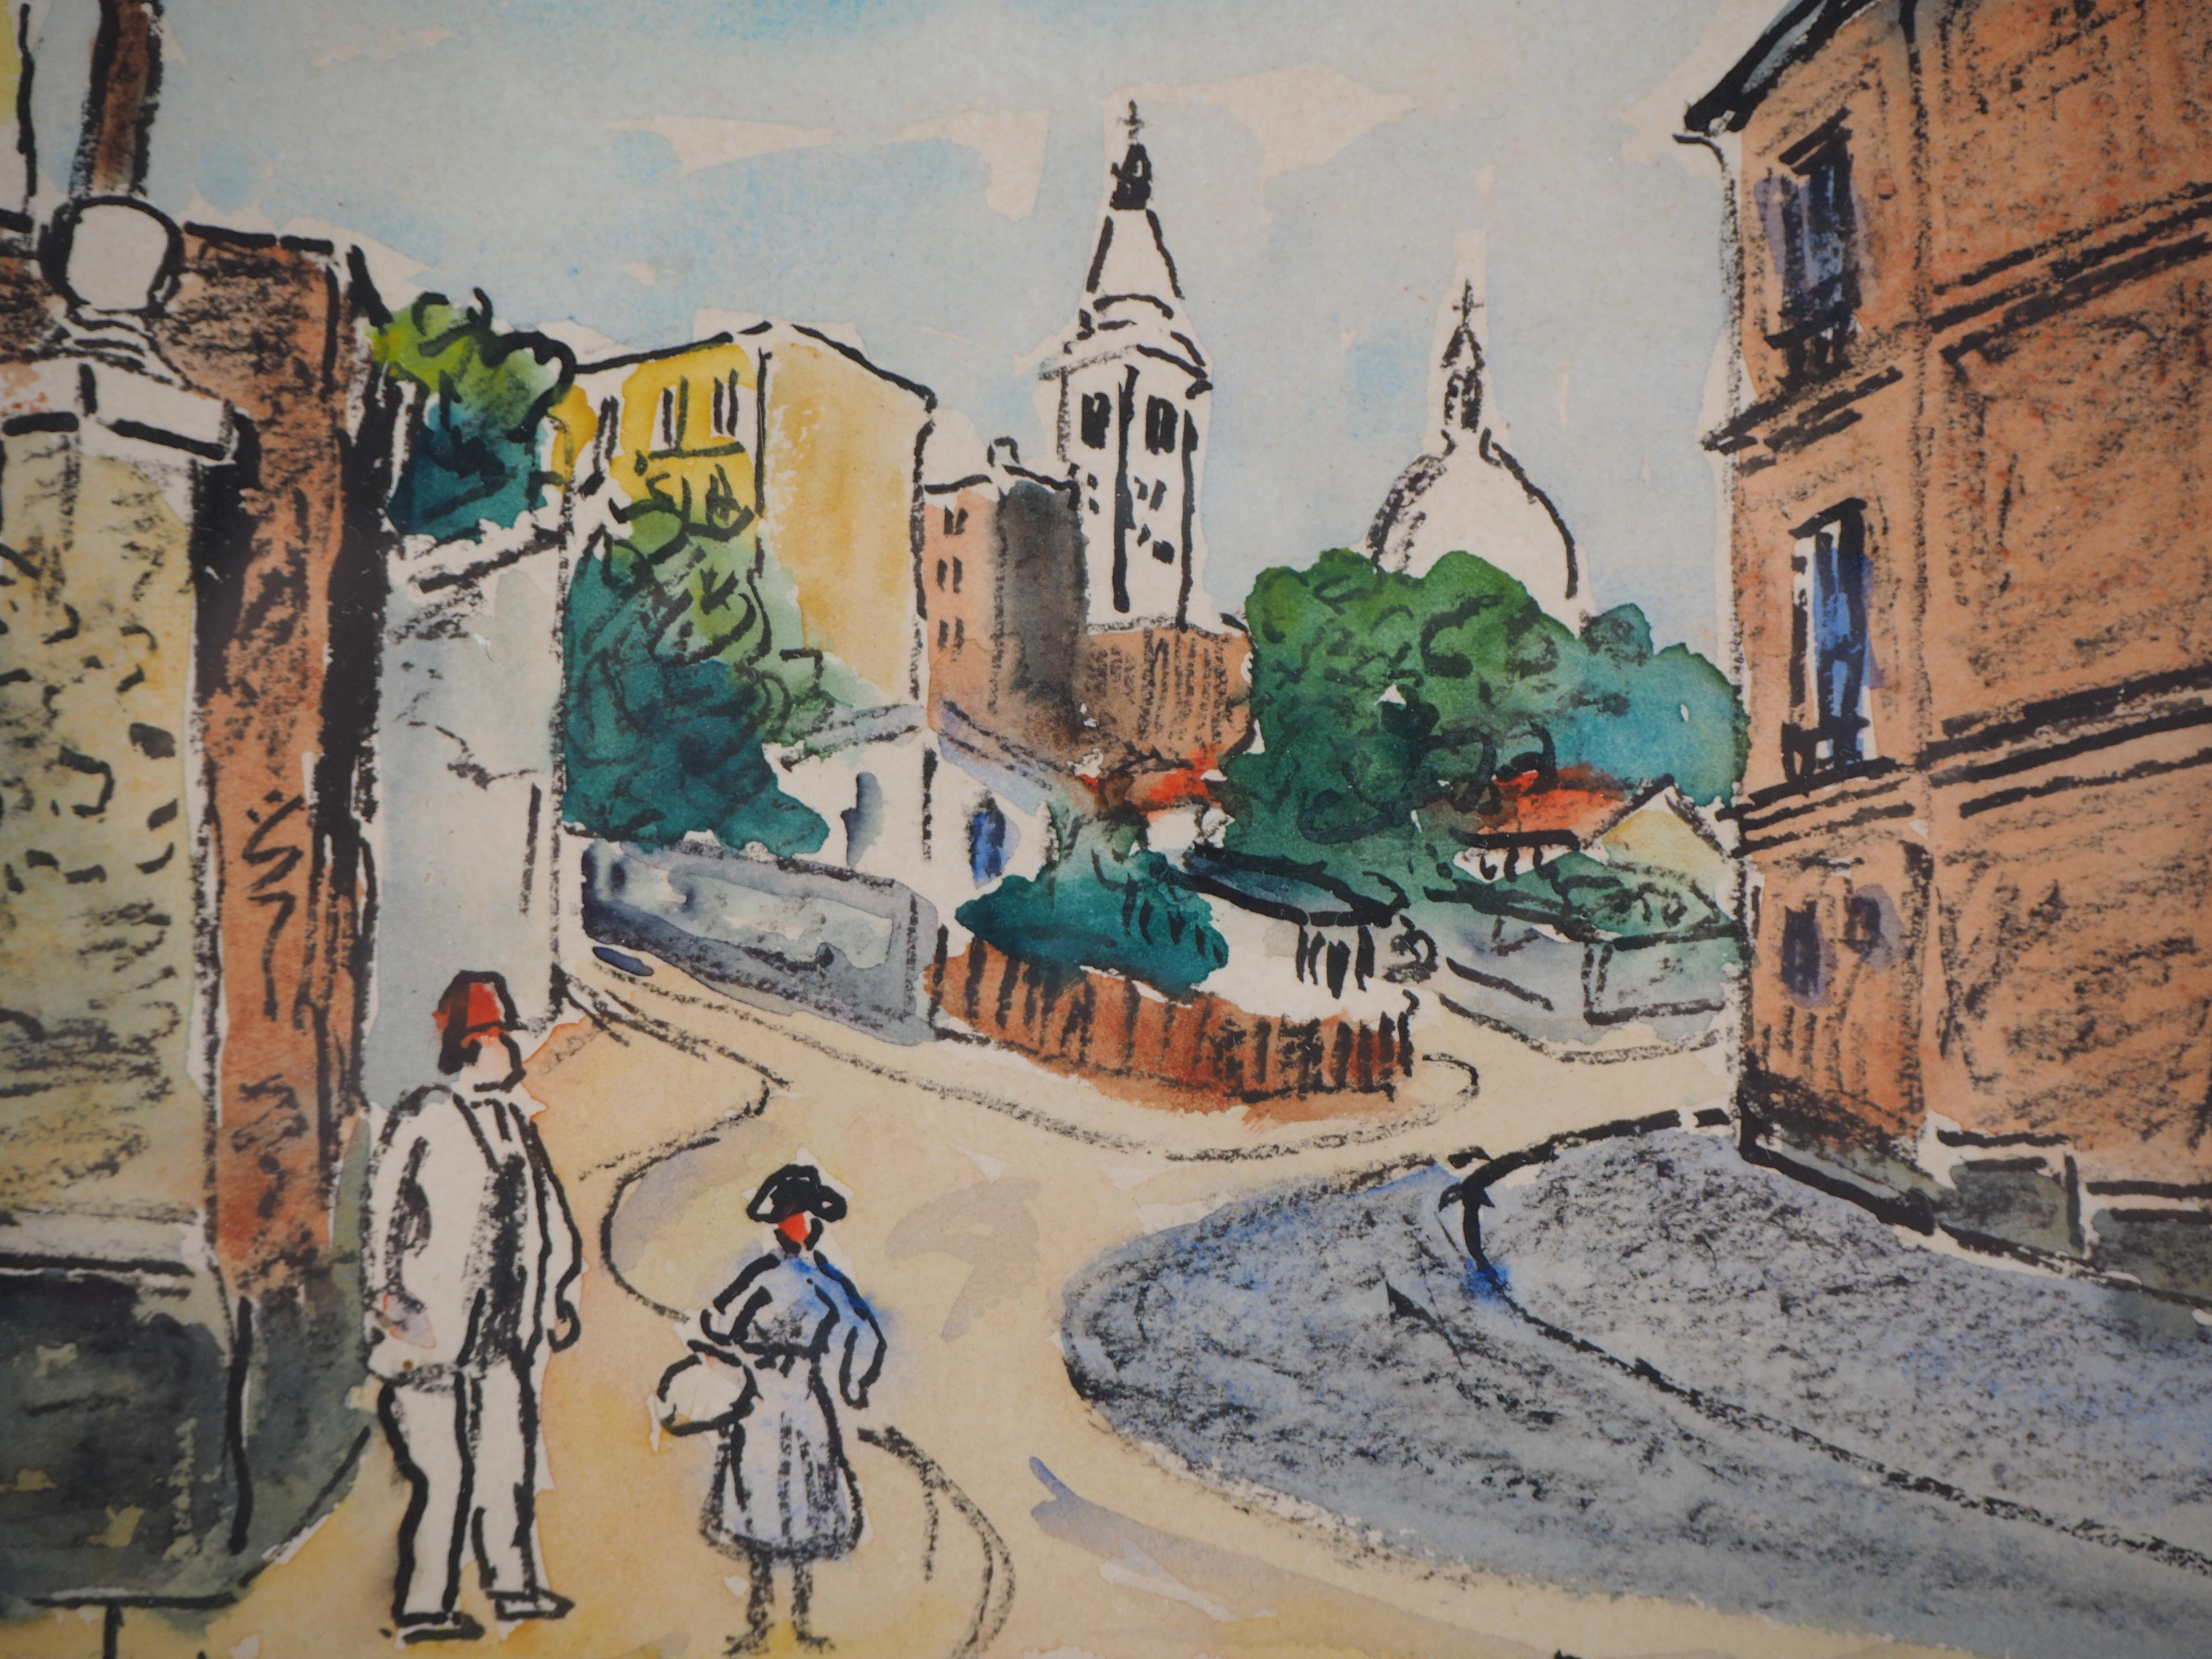 Elisée MACLET
Paris, Ravignan Street in Montmartre

Original watercolor
Handsigned bottom left
On vellum 23 x 32 cm at view (c. 9 x 13 in)
Presented in glass frame 32 x 41 cm (c. 13 x 16 inch)

Excellent condition, light use to the frame